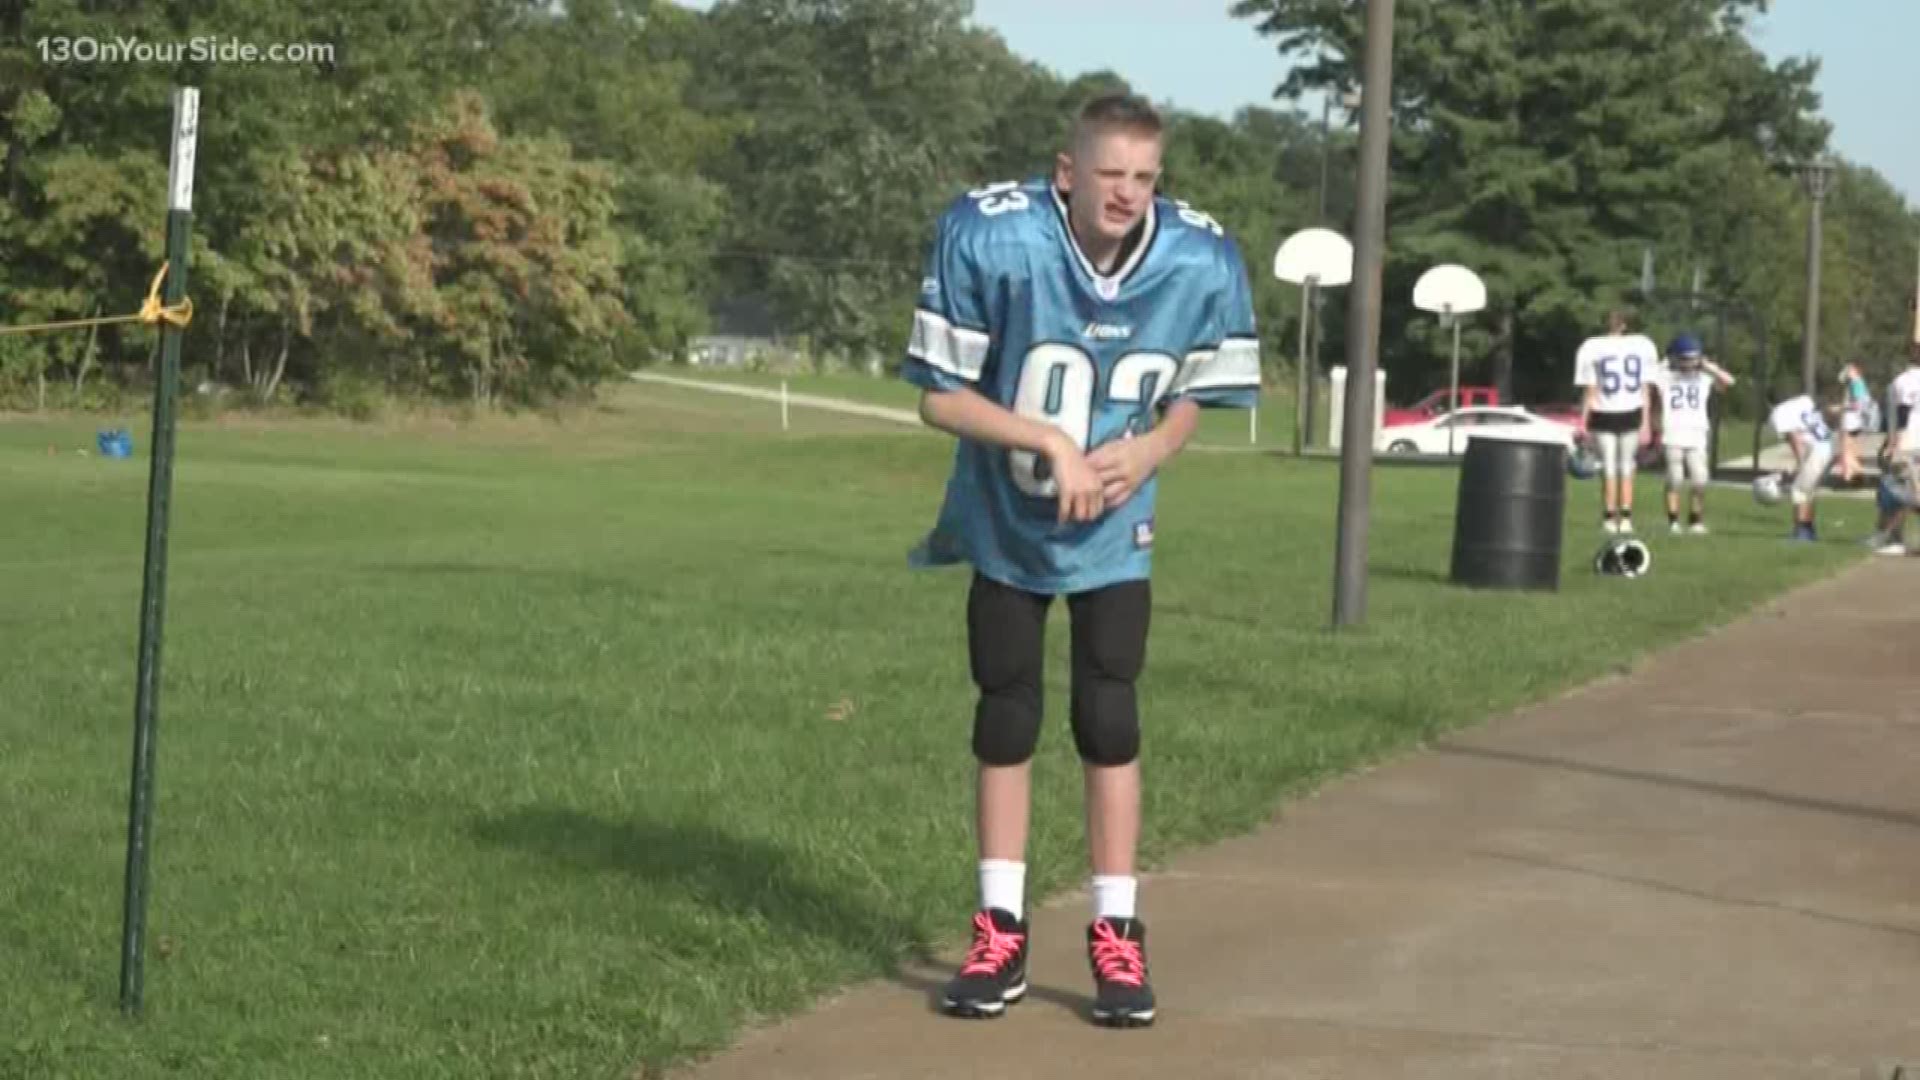 Ben Hayes has autism. But the 6th grader has found an escape in sports.